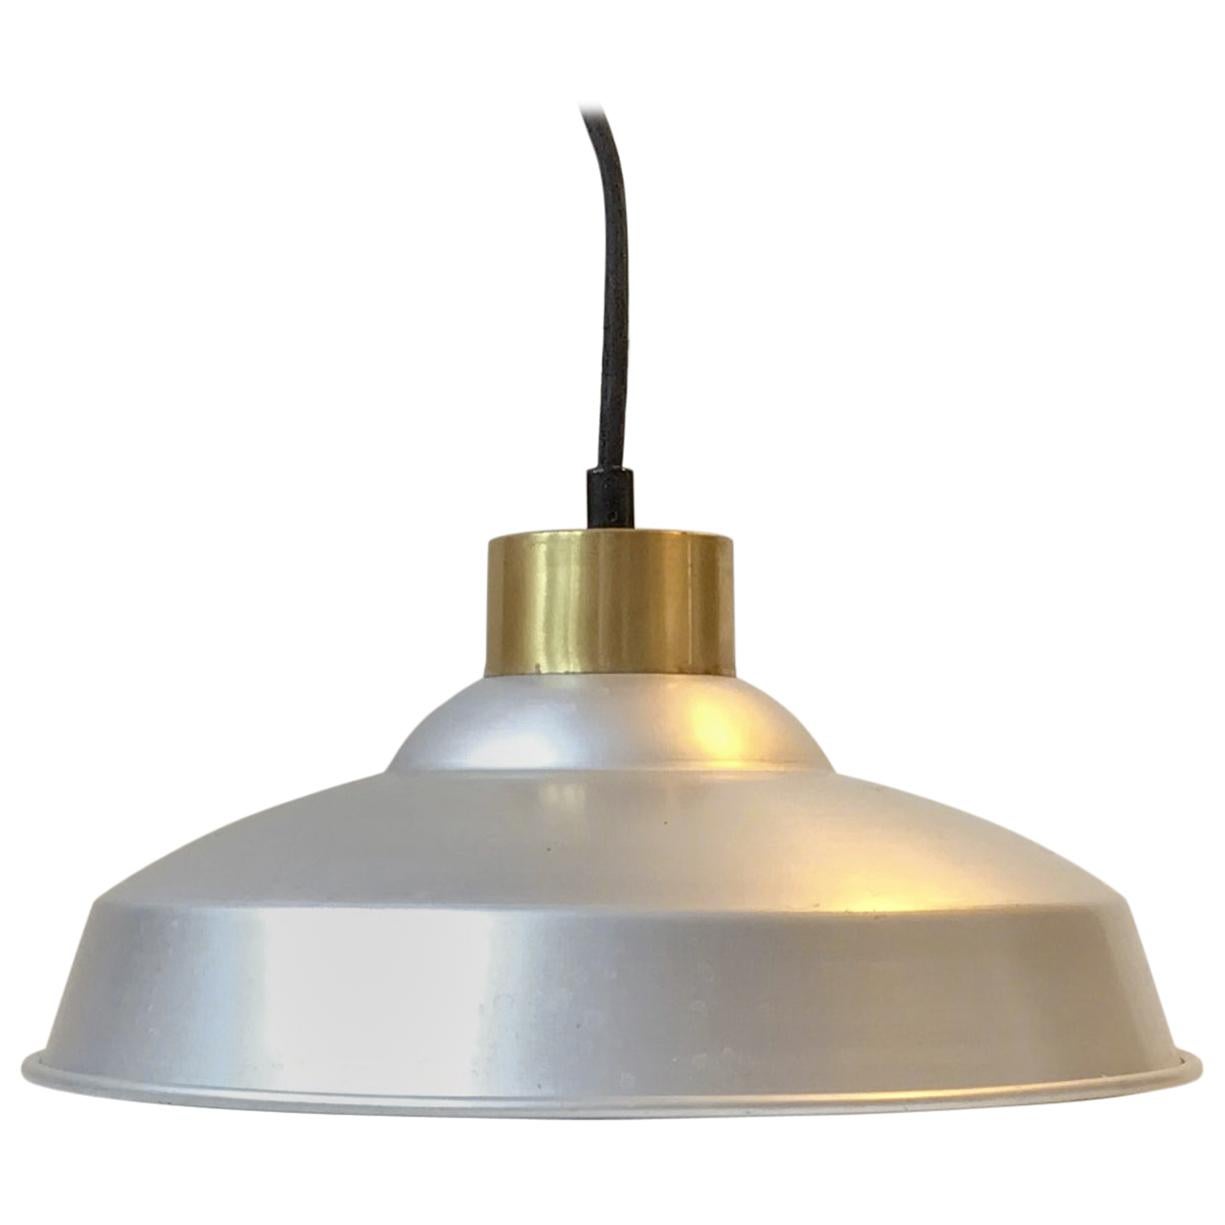 Vintage Danish Industrial Pendant Lamp from NES, 1950s For Sale